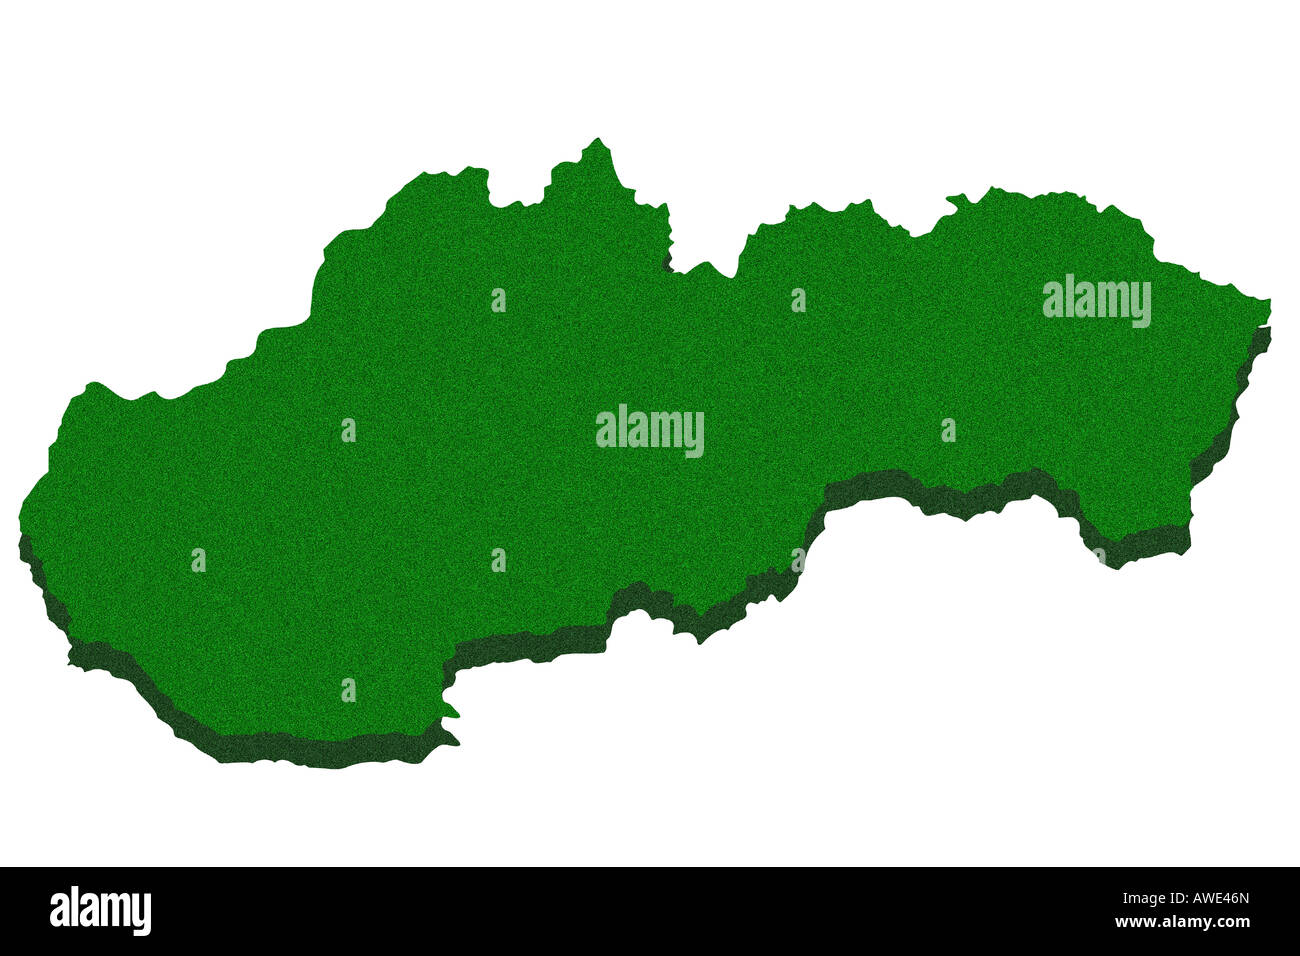 Outline map of Slovakia Stock Photo